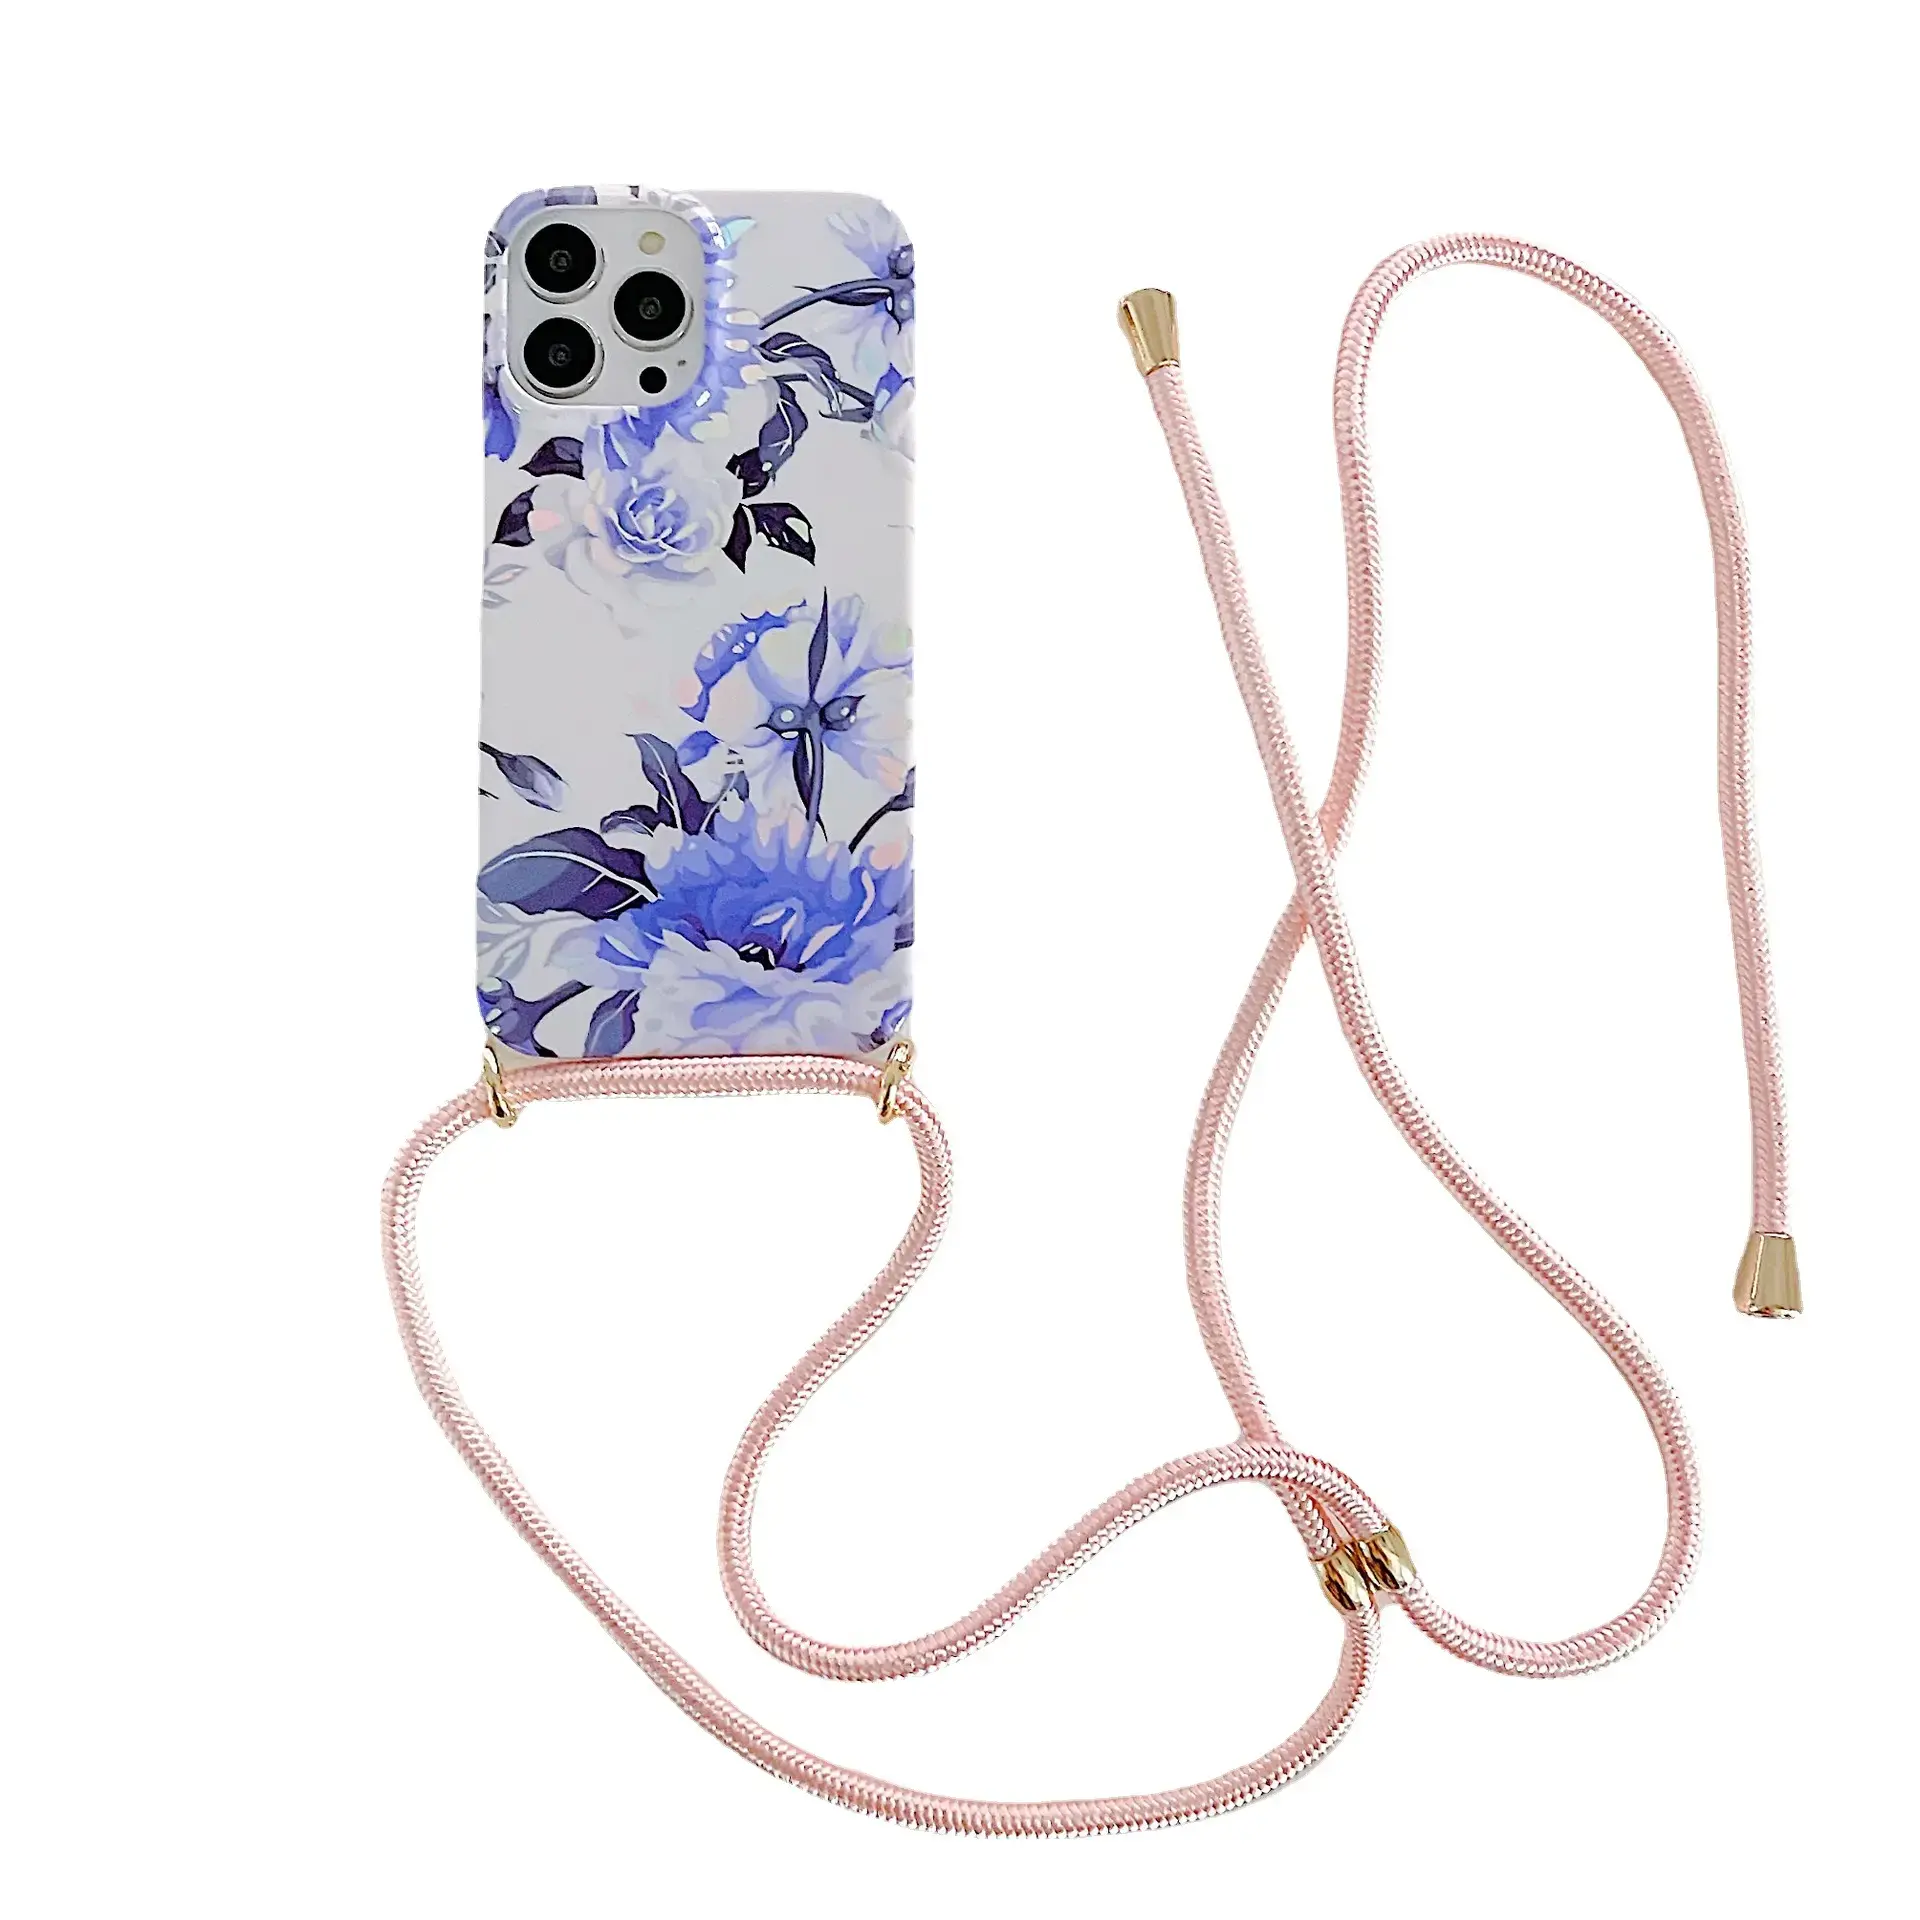 Luxury Liquid Silicone Chain Necklace Phone Case with Lanyard Crossbody  Neck Strap For iPhone 13 Pro Max 12 Pro 11 XS MAX XR XS X IPhone 8 7 Plus 6  6s Plus